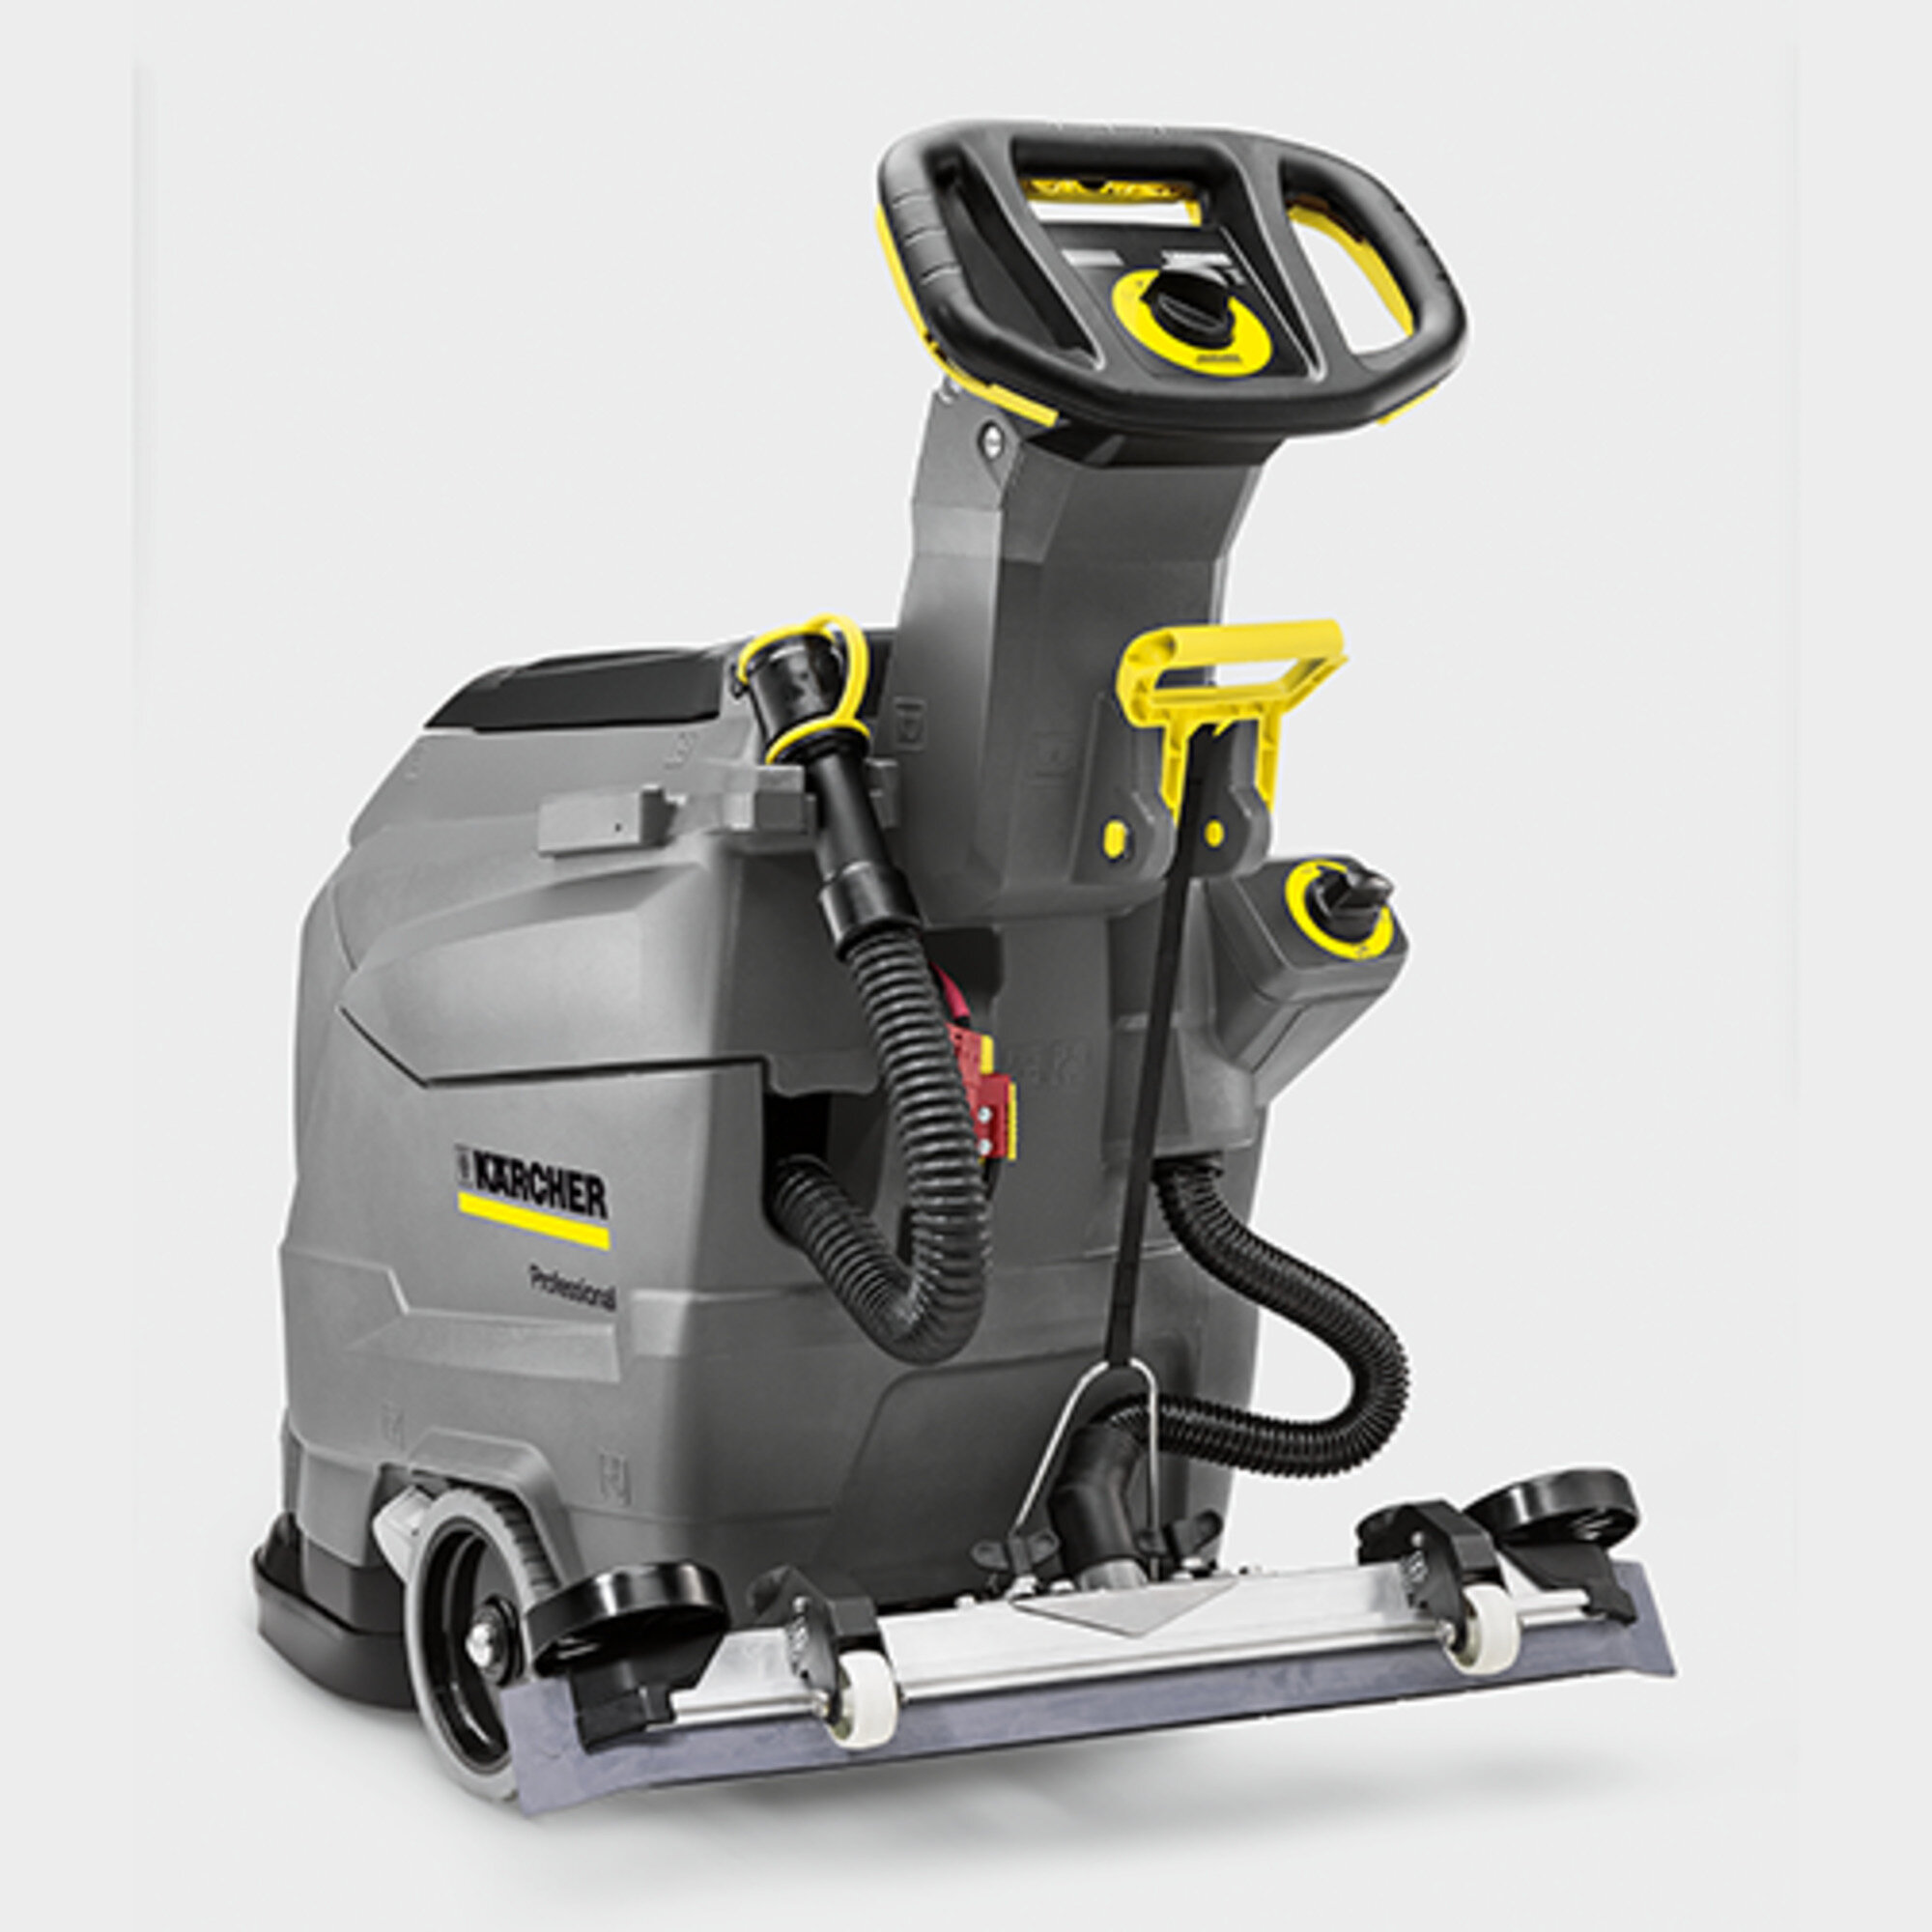 Scrubber dryer BD 43/35 C Ep: Simple operation thanks to EASY-Operation Panel